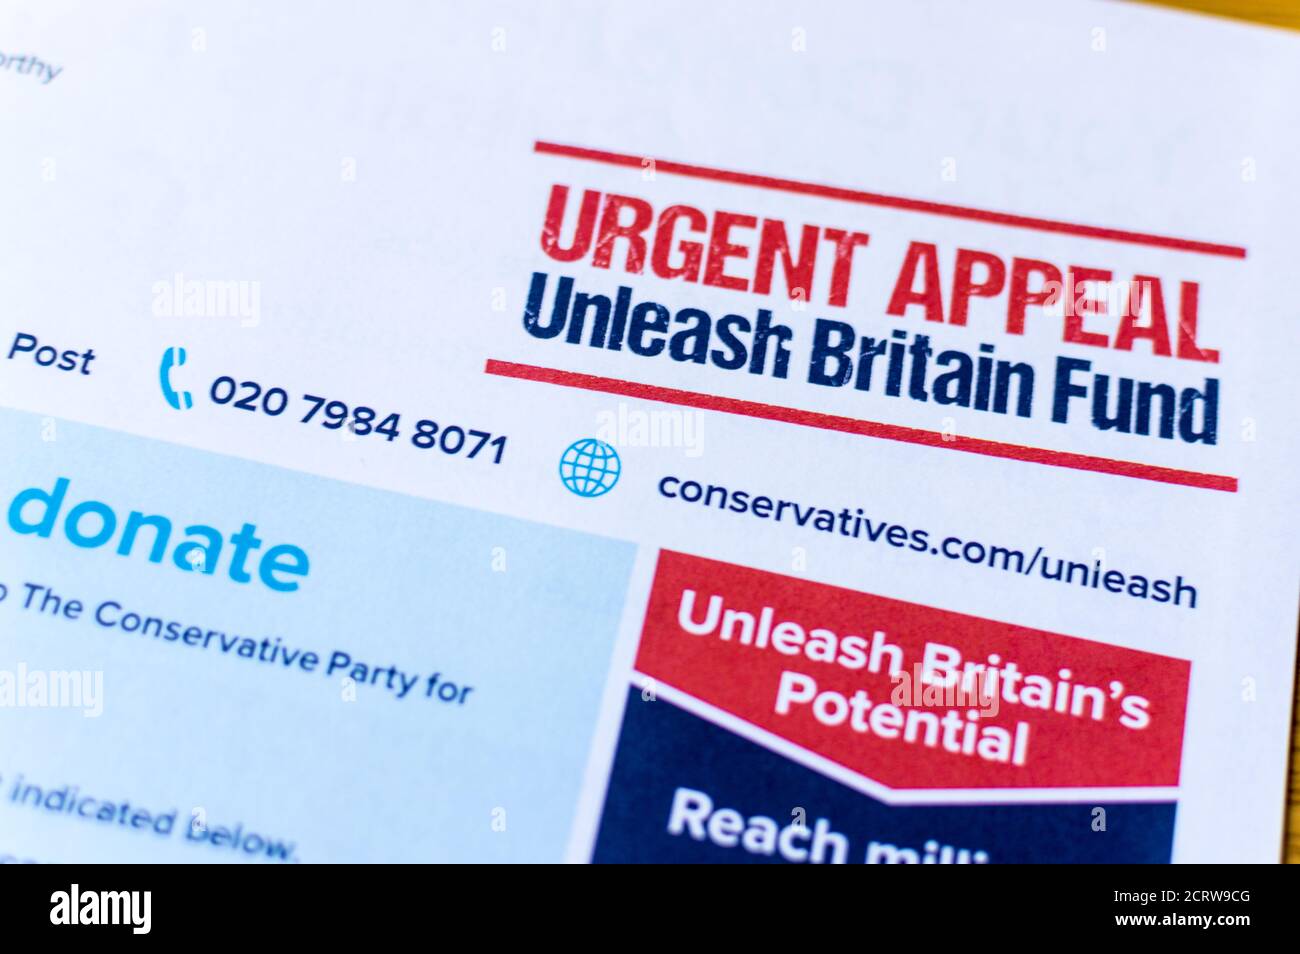 Conservatives unleash Britain Fund appeal through postal letter Stock Photo